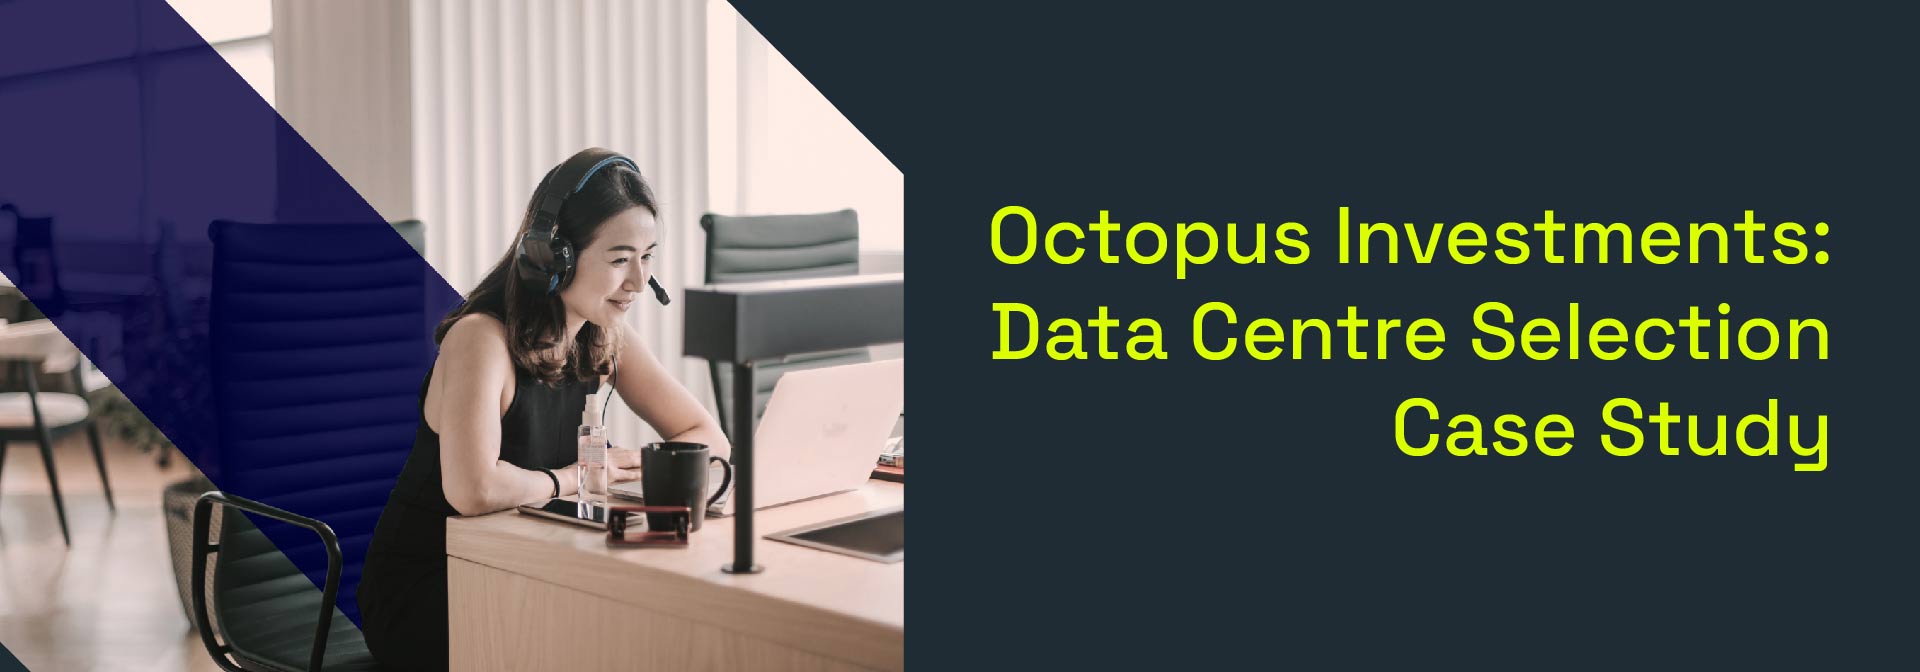 Octopus Investments - Data Centre Selection Case Study